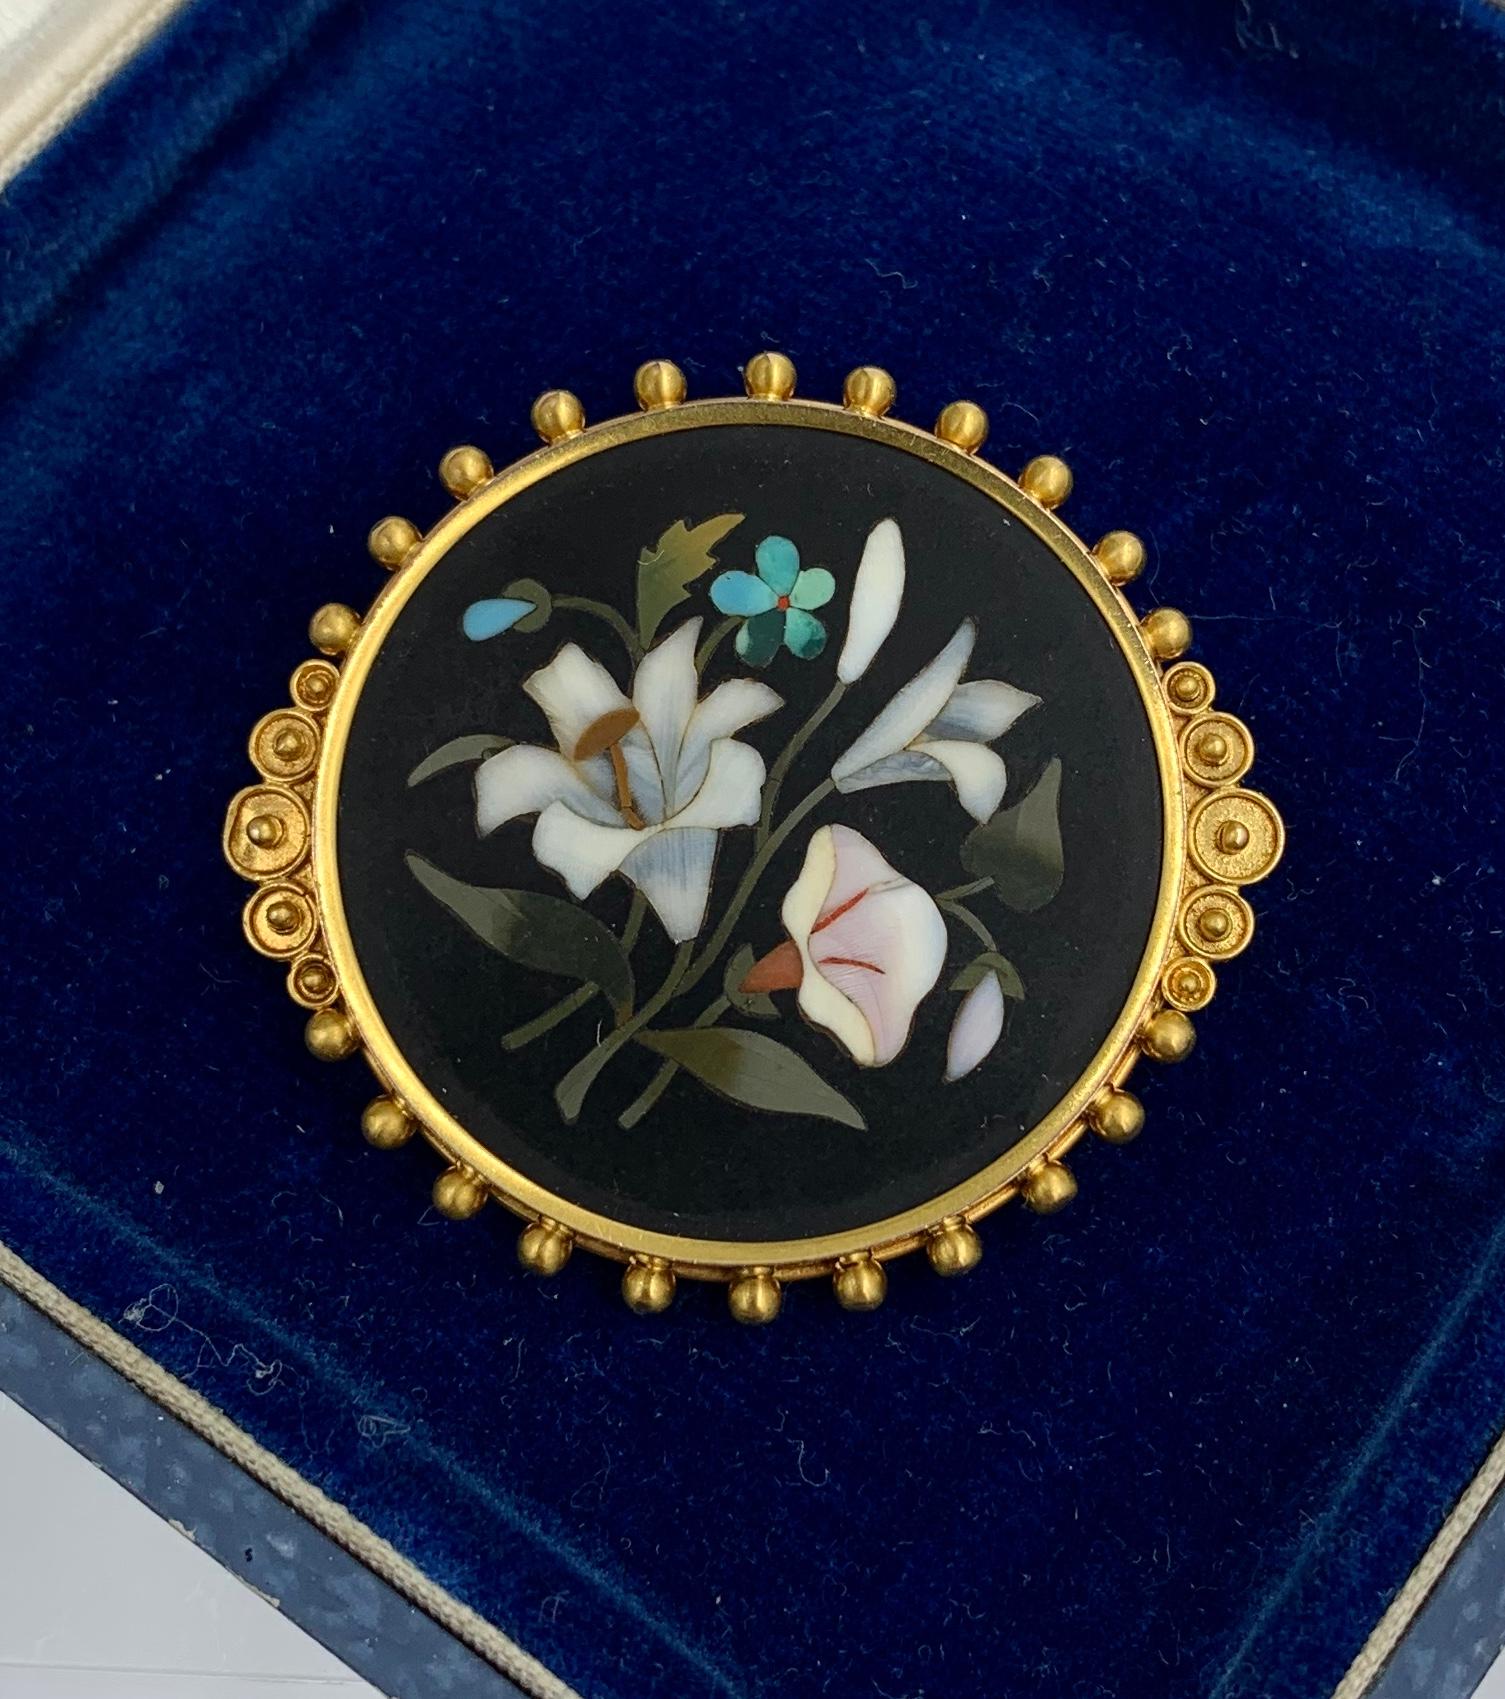 A stunning Pietra Dura Brooch with inlaid semi-precious stones creating a mosaic image of flowers including lily, poppy and forget-me-not flowers.  The brooch is a masterpiece of Pietra Dura work.  The vivid flowers and leaves set against the black